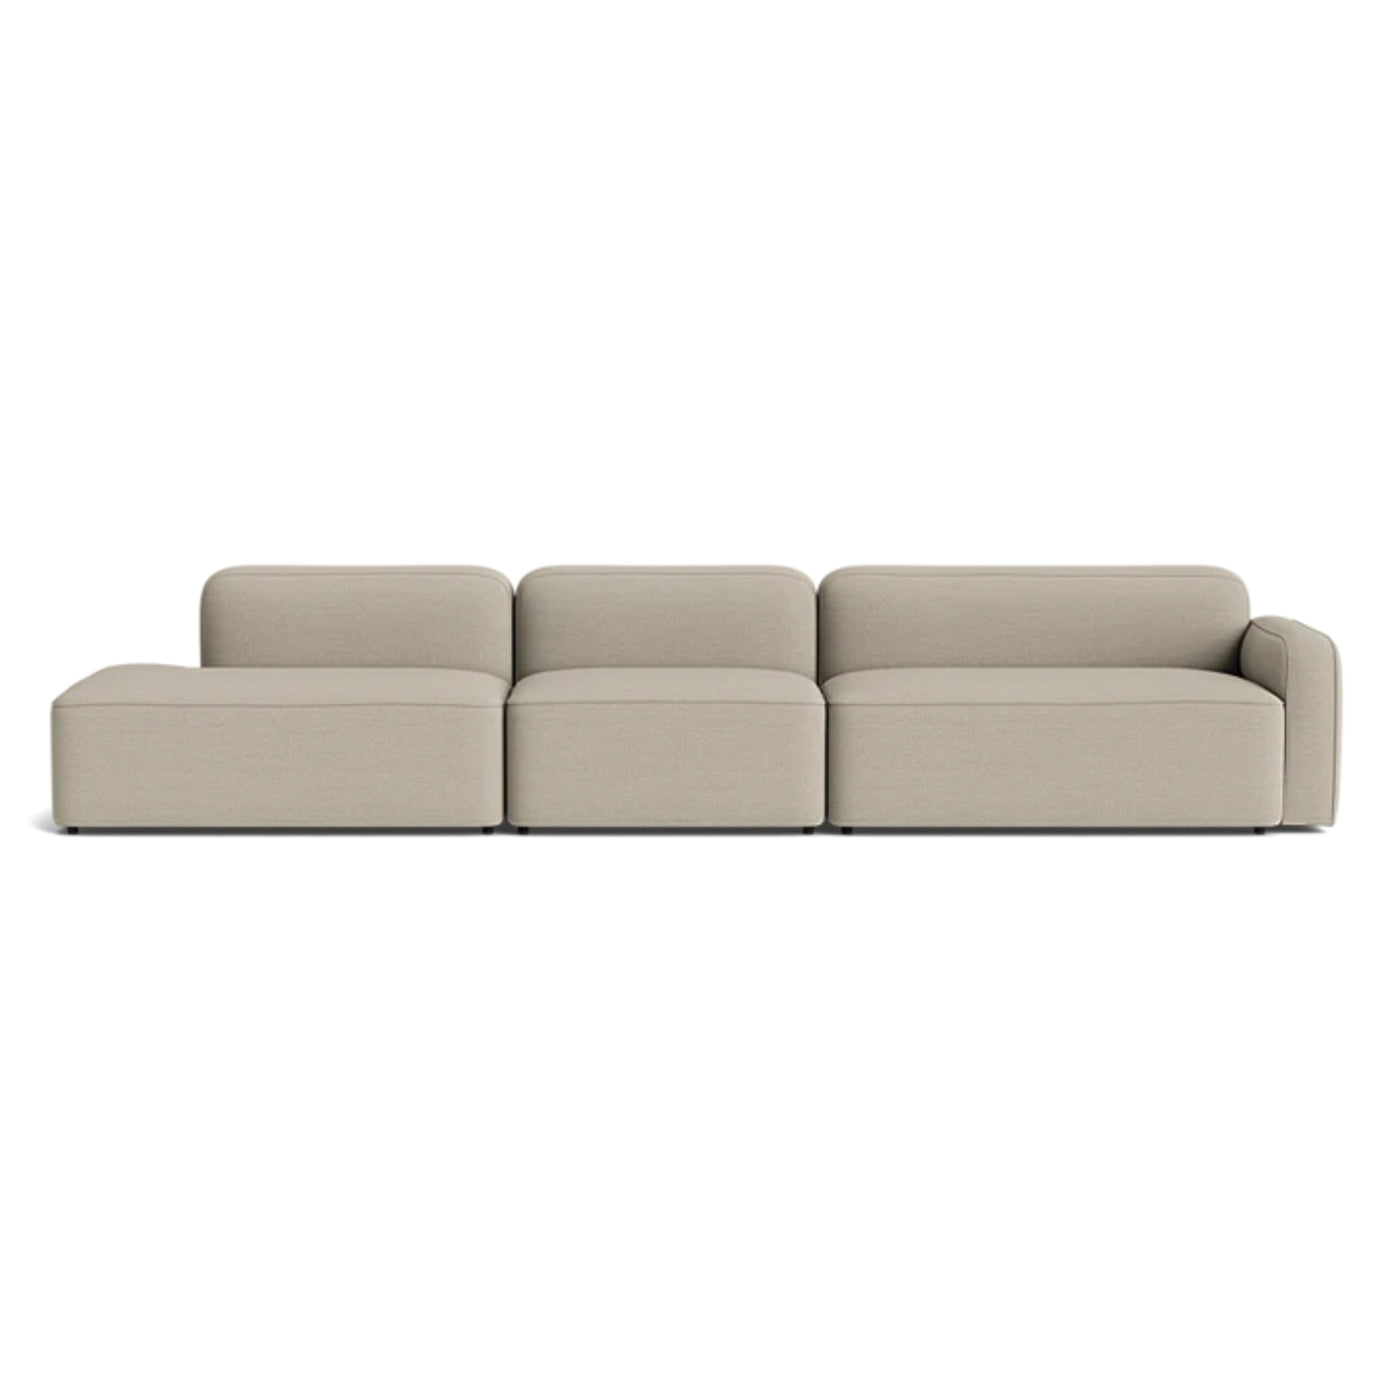 Normann Copenhagen Rope 3 Seater Modular Sofa. Made to order at someday designs. #colour_hallingdal-220